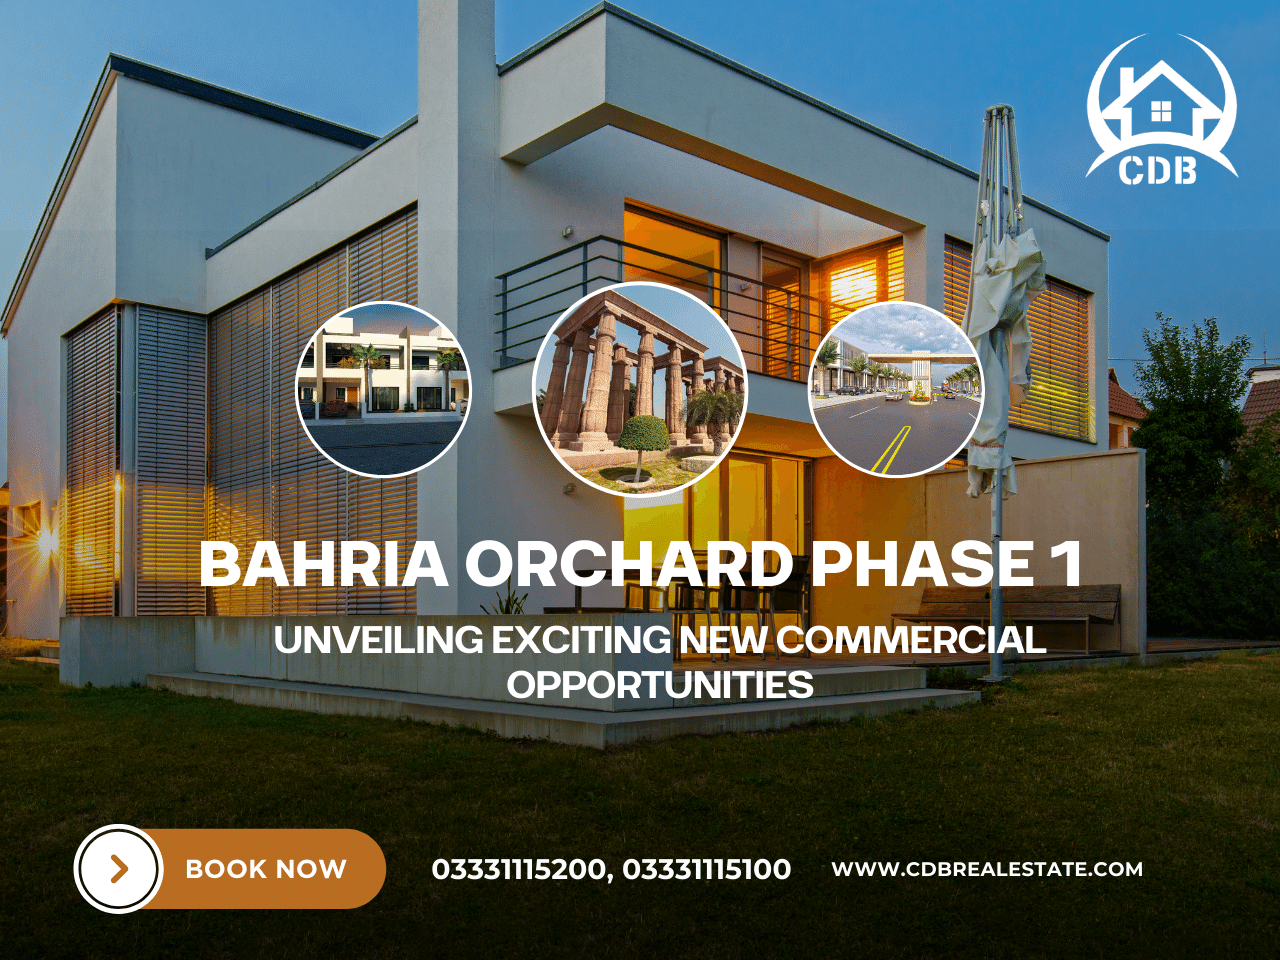 Unveiling Exciting New Commercial Opportunities in Bahria Orchard Phase 1